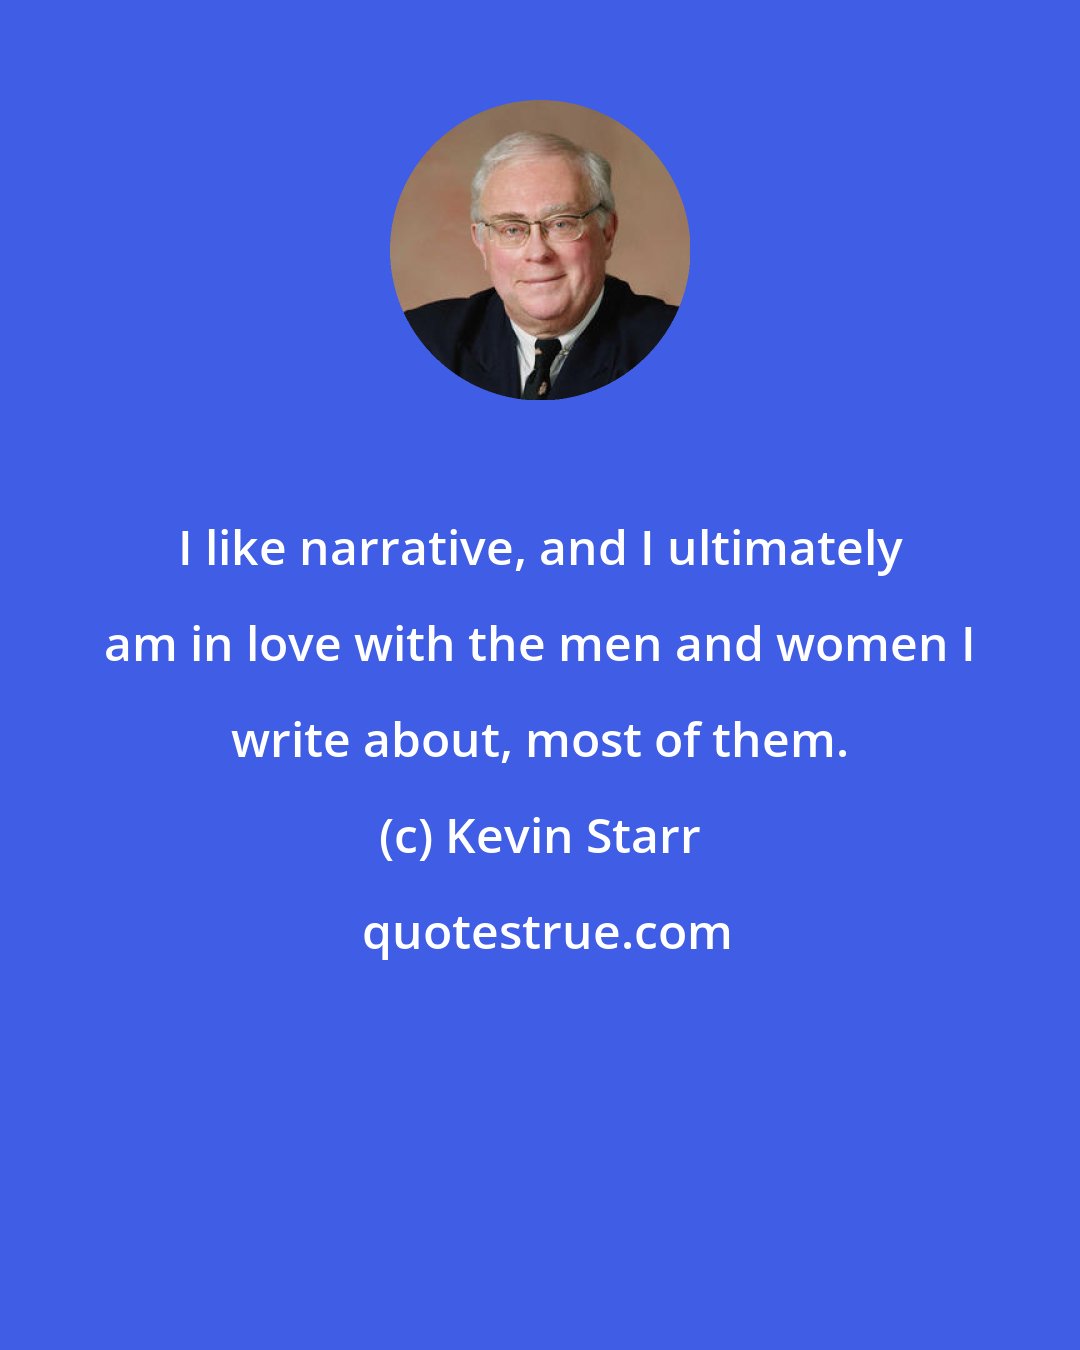 Kevin Starr: I like narrative, and I ultimately am in love with the men and women I write about, most of them.